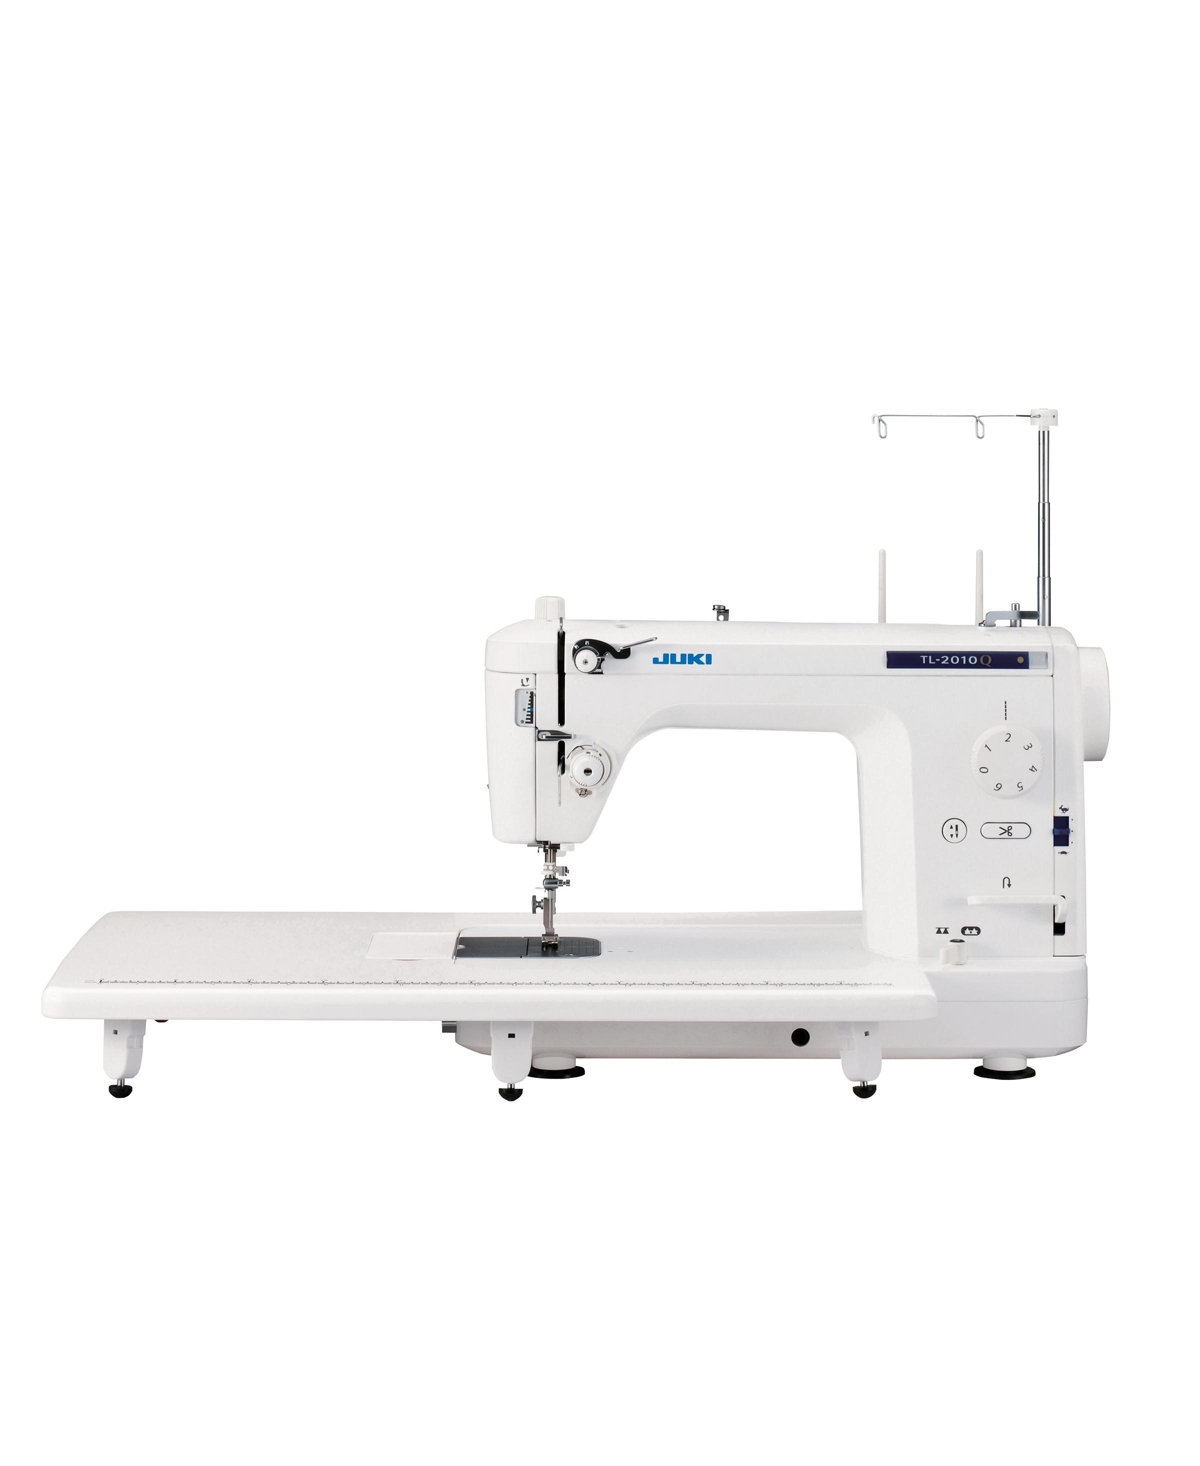 Tl-2010Q High-Speed Mechanical Sewing and Quilting Machine - White